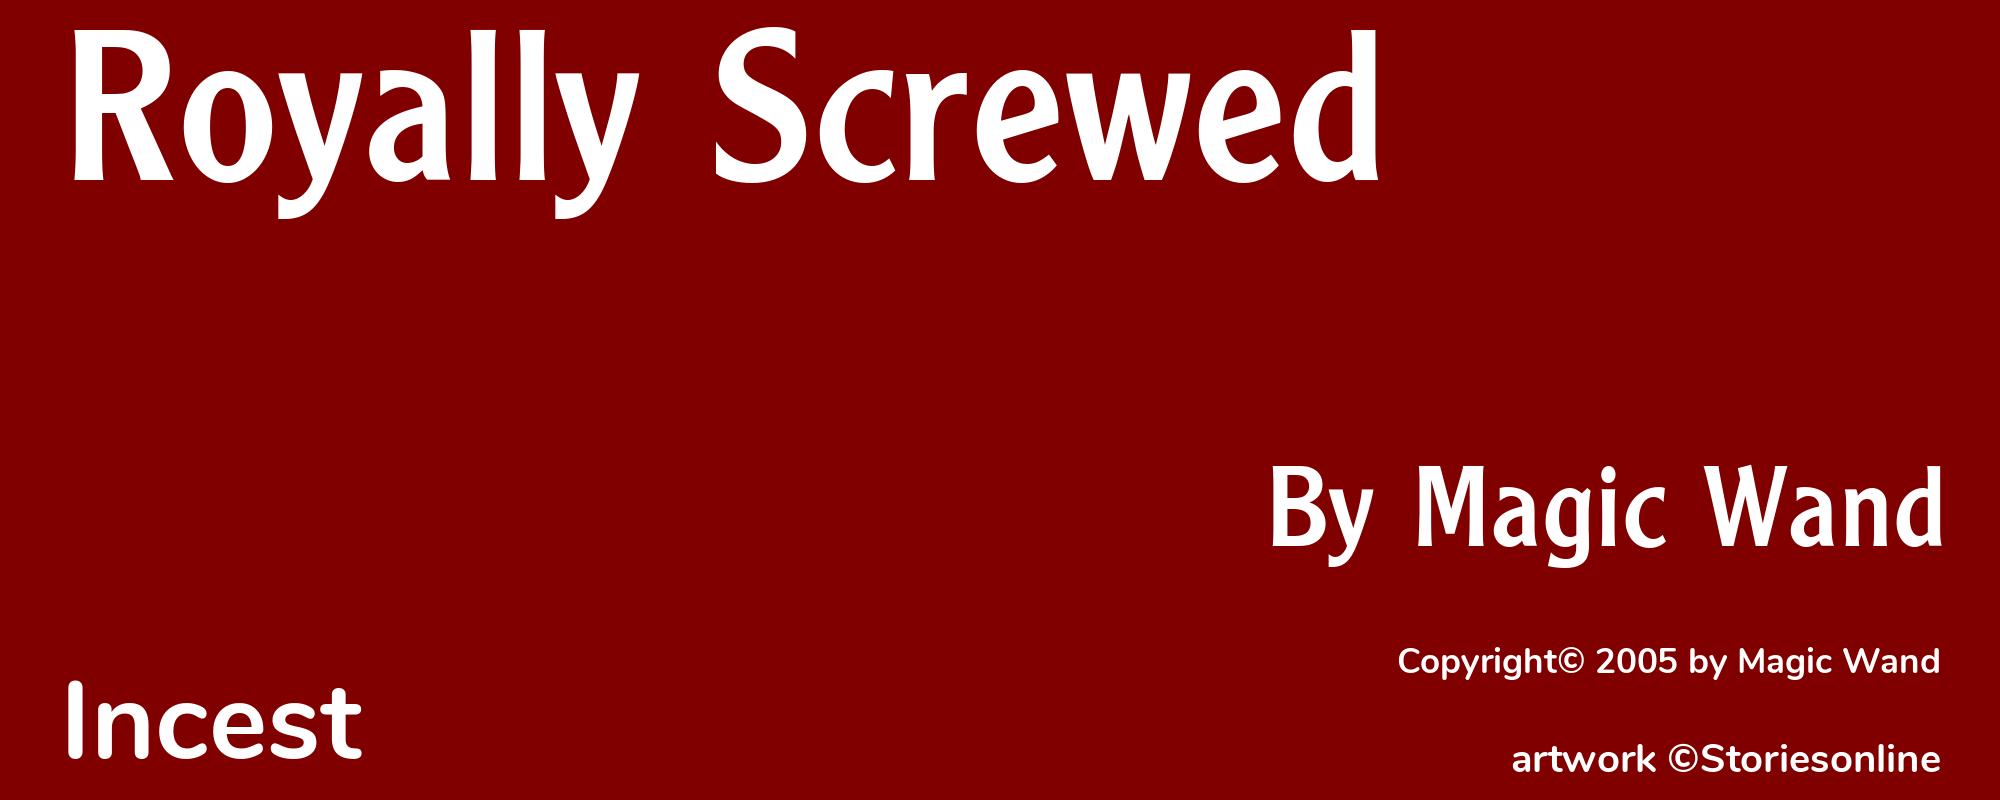 Royally Screwed - Cover